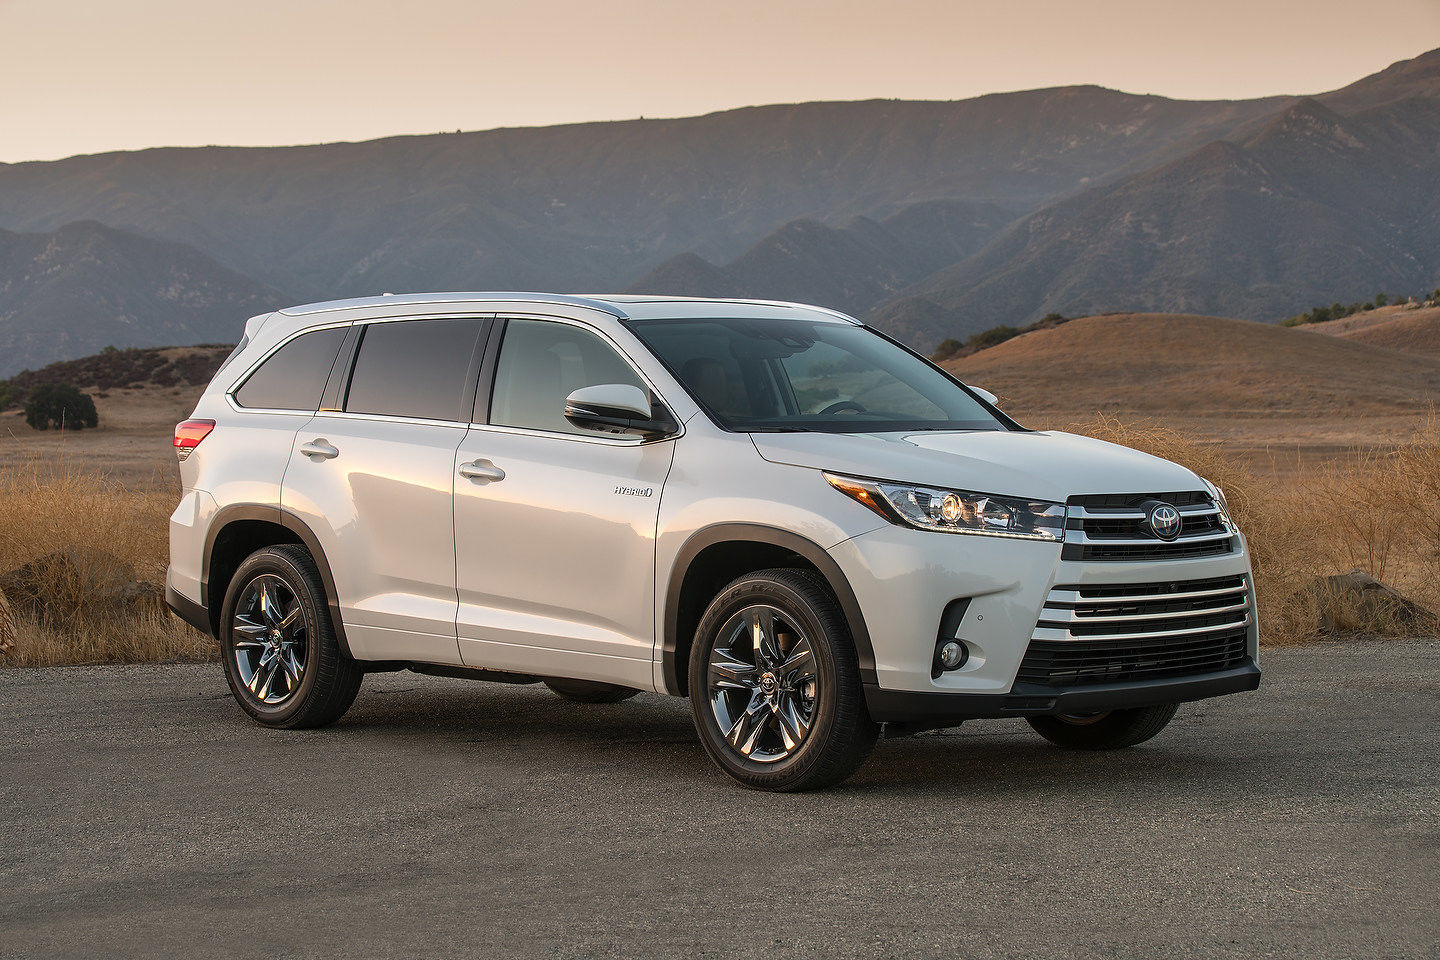 https://img.sm360.ca/images/article/groupe-chasse/53459//2019-toyota-highlander1541022598611.jpg